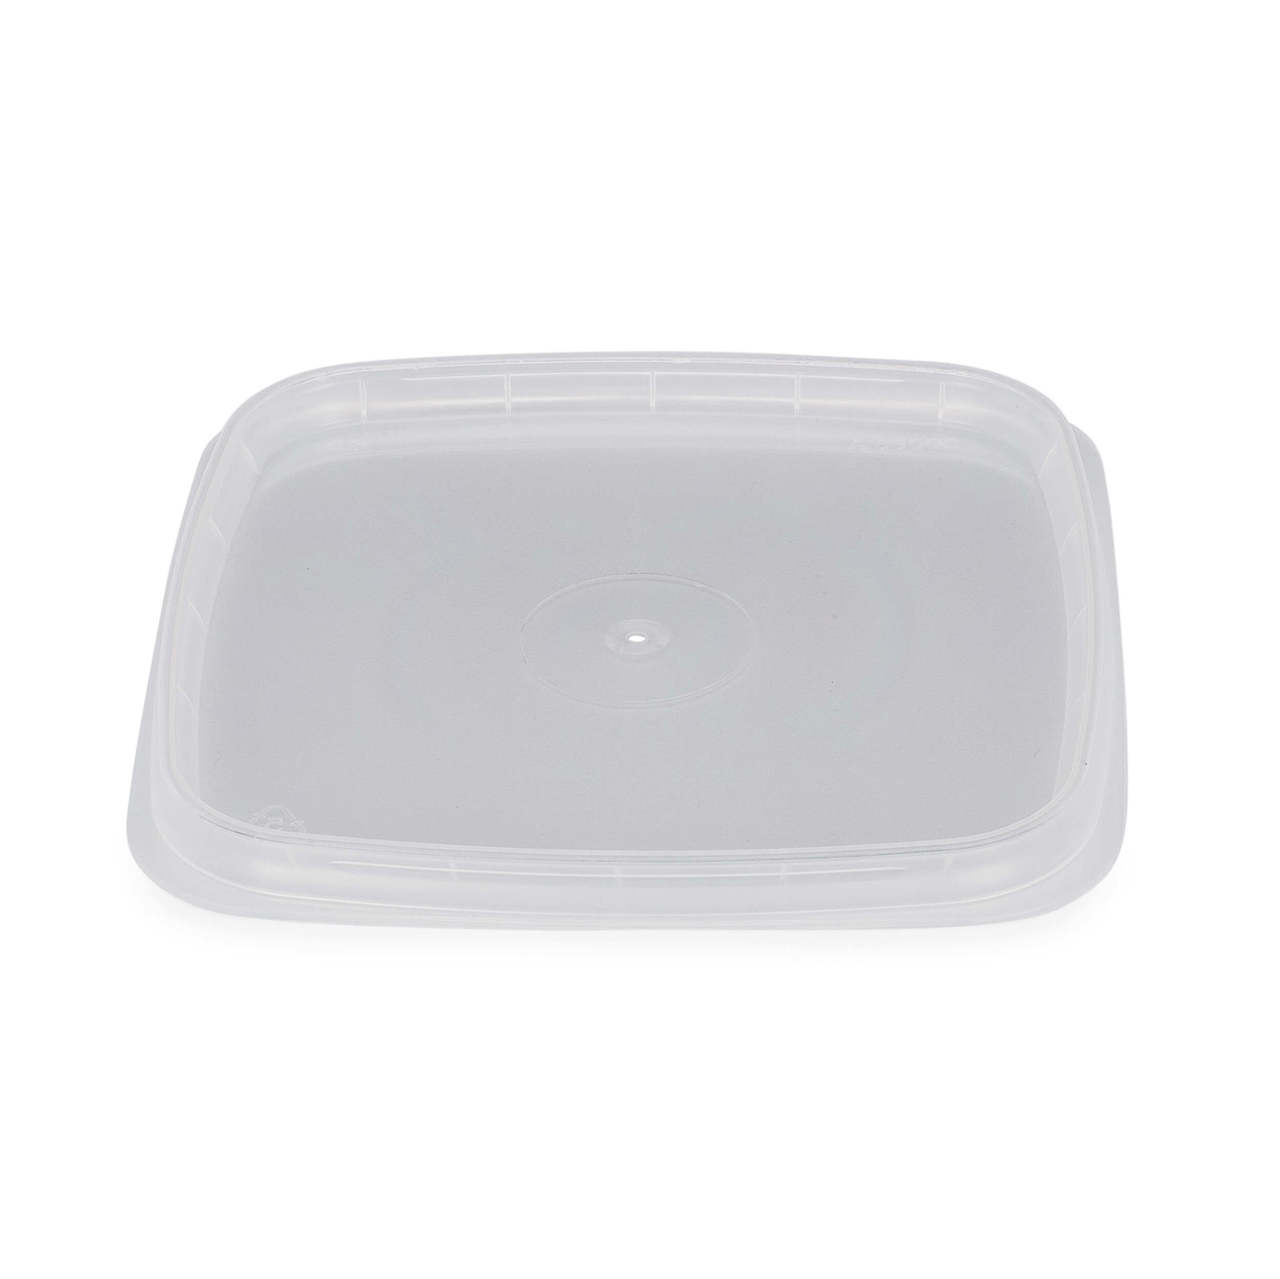 12 oz. BPA Free Food Grade SelecTE (Tamper Evident) Square Container with  Lid (T4X412IMLCP & L4X4IMLCP) - starting quantity 25 count - FREE SHIPPING  - ePackageSupply